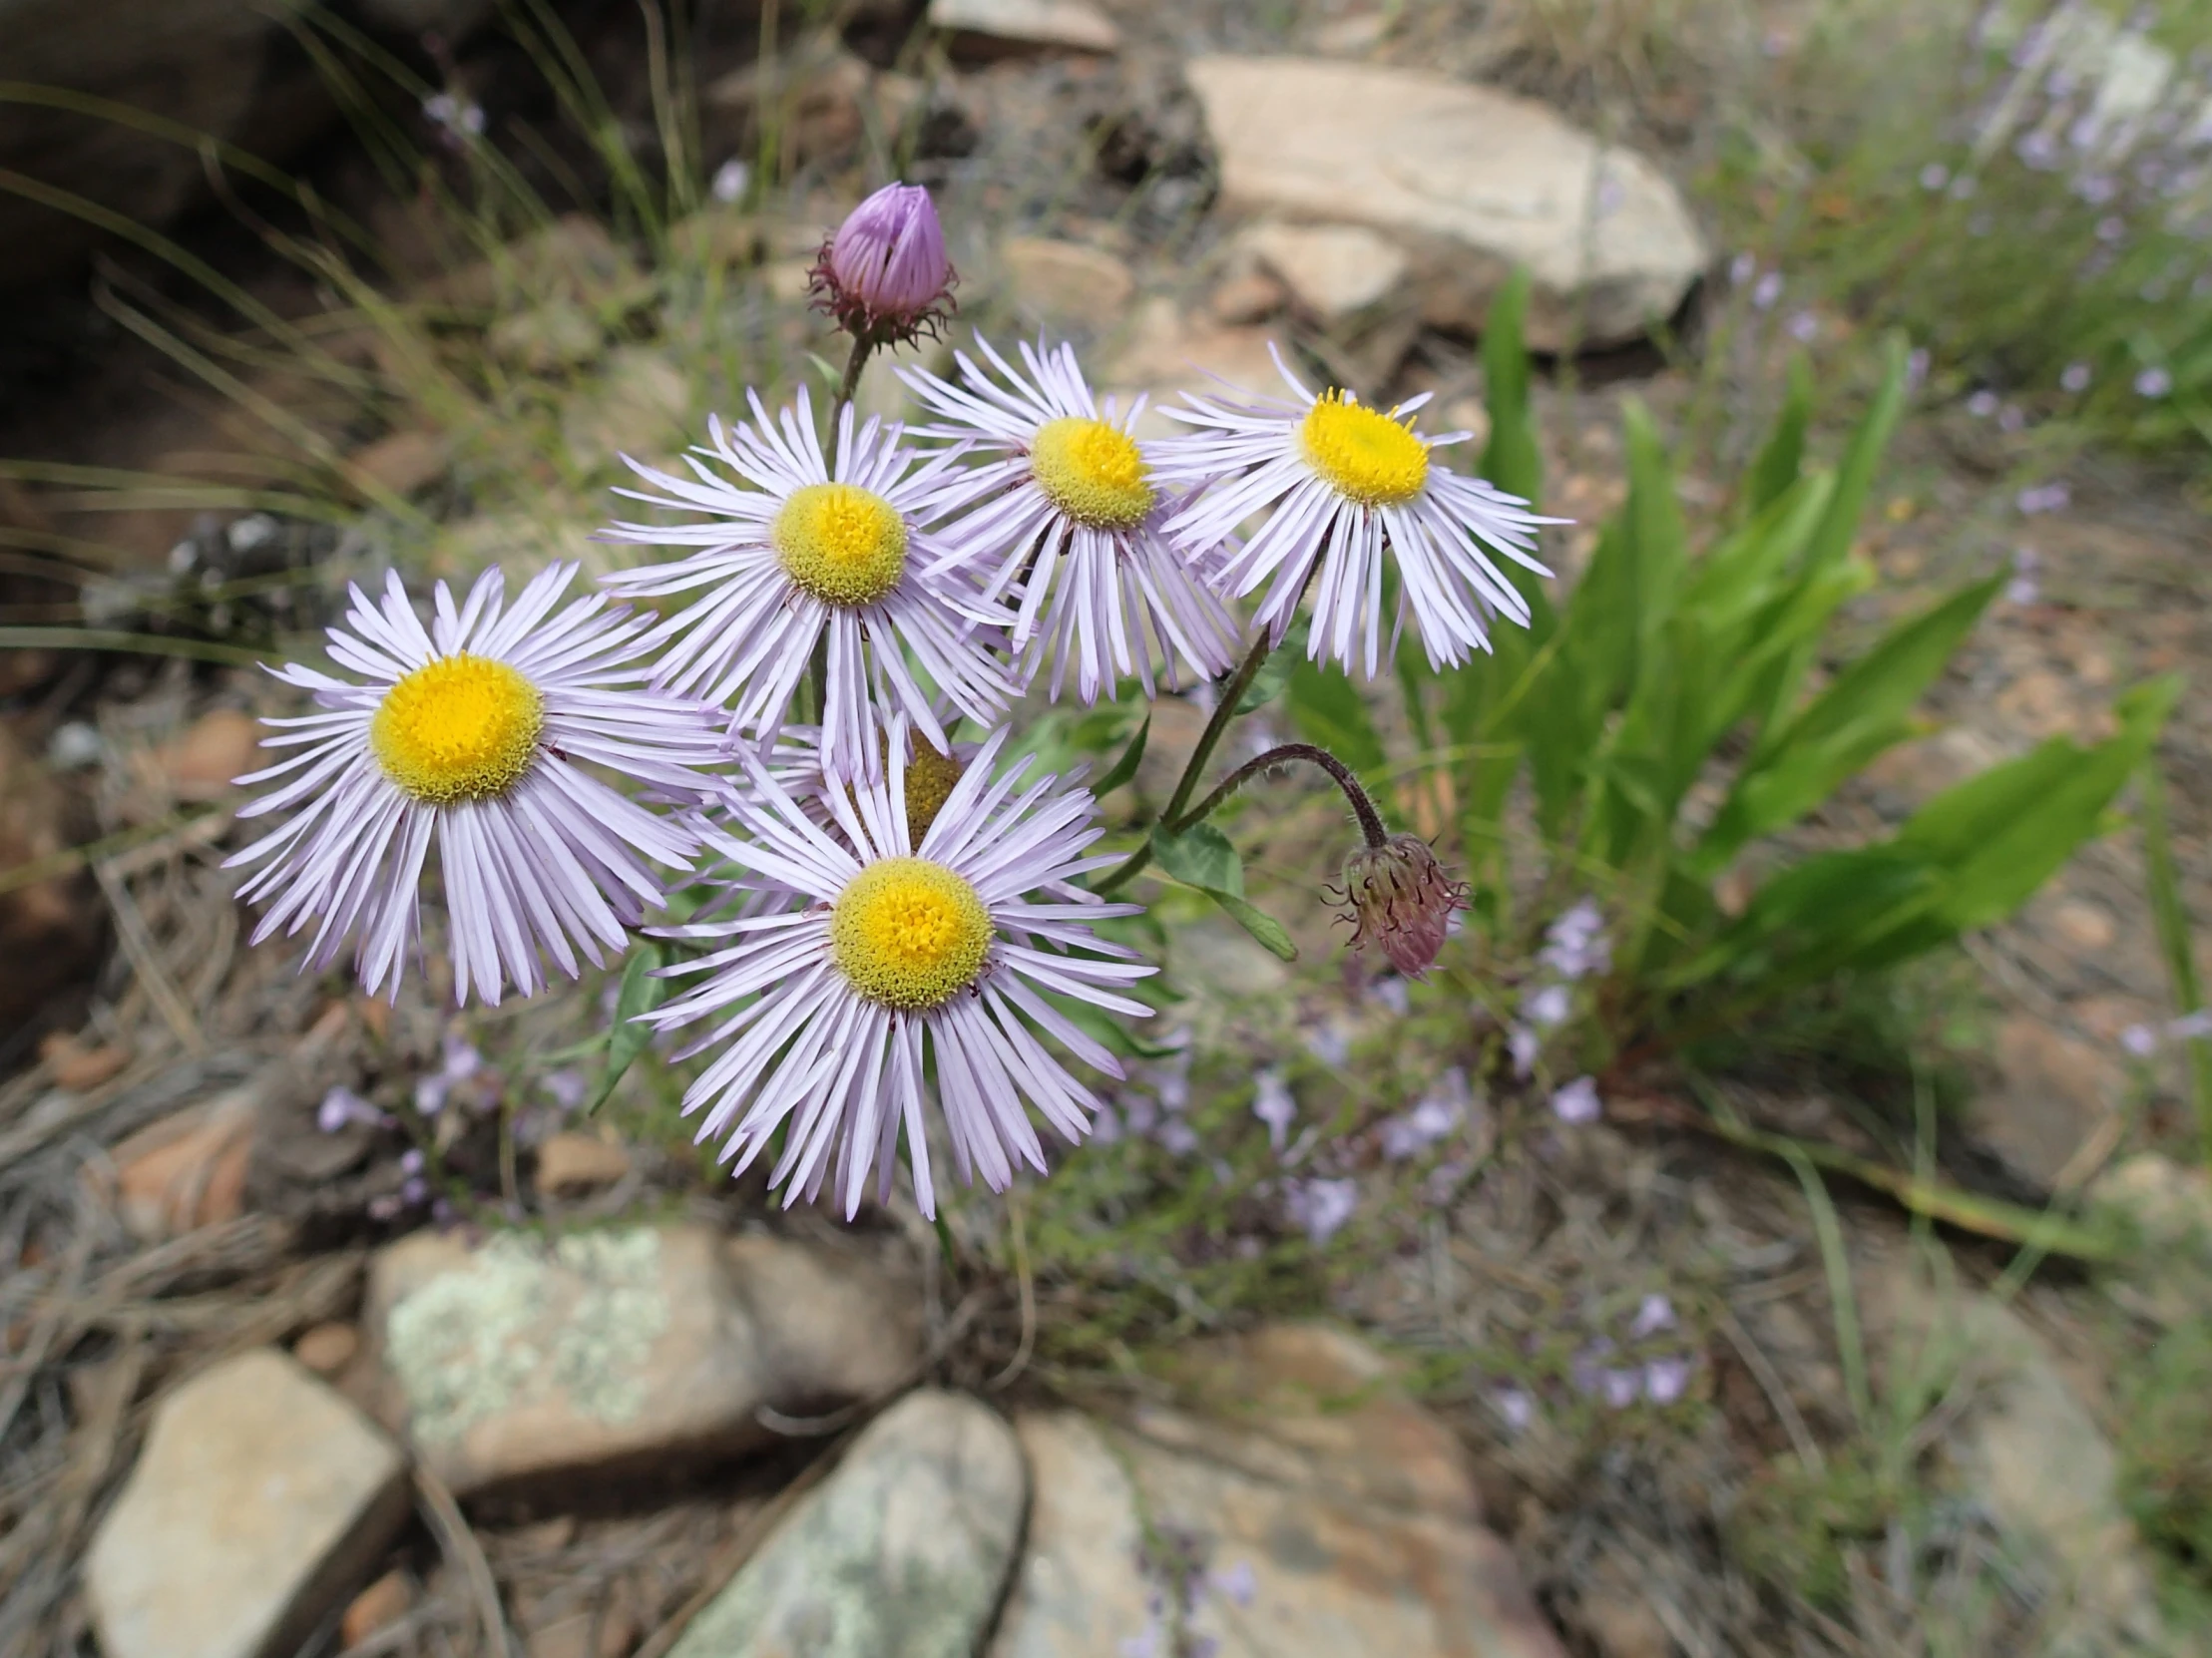 a group of wild flowers sit near rocks and vegetation